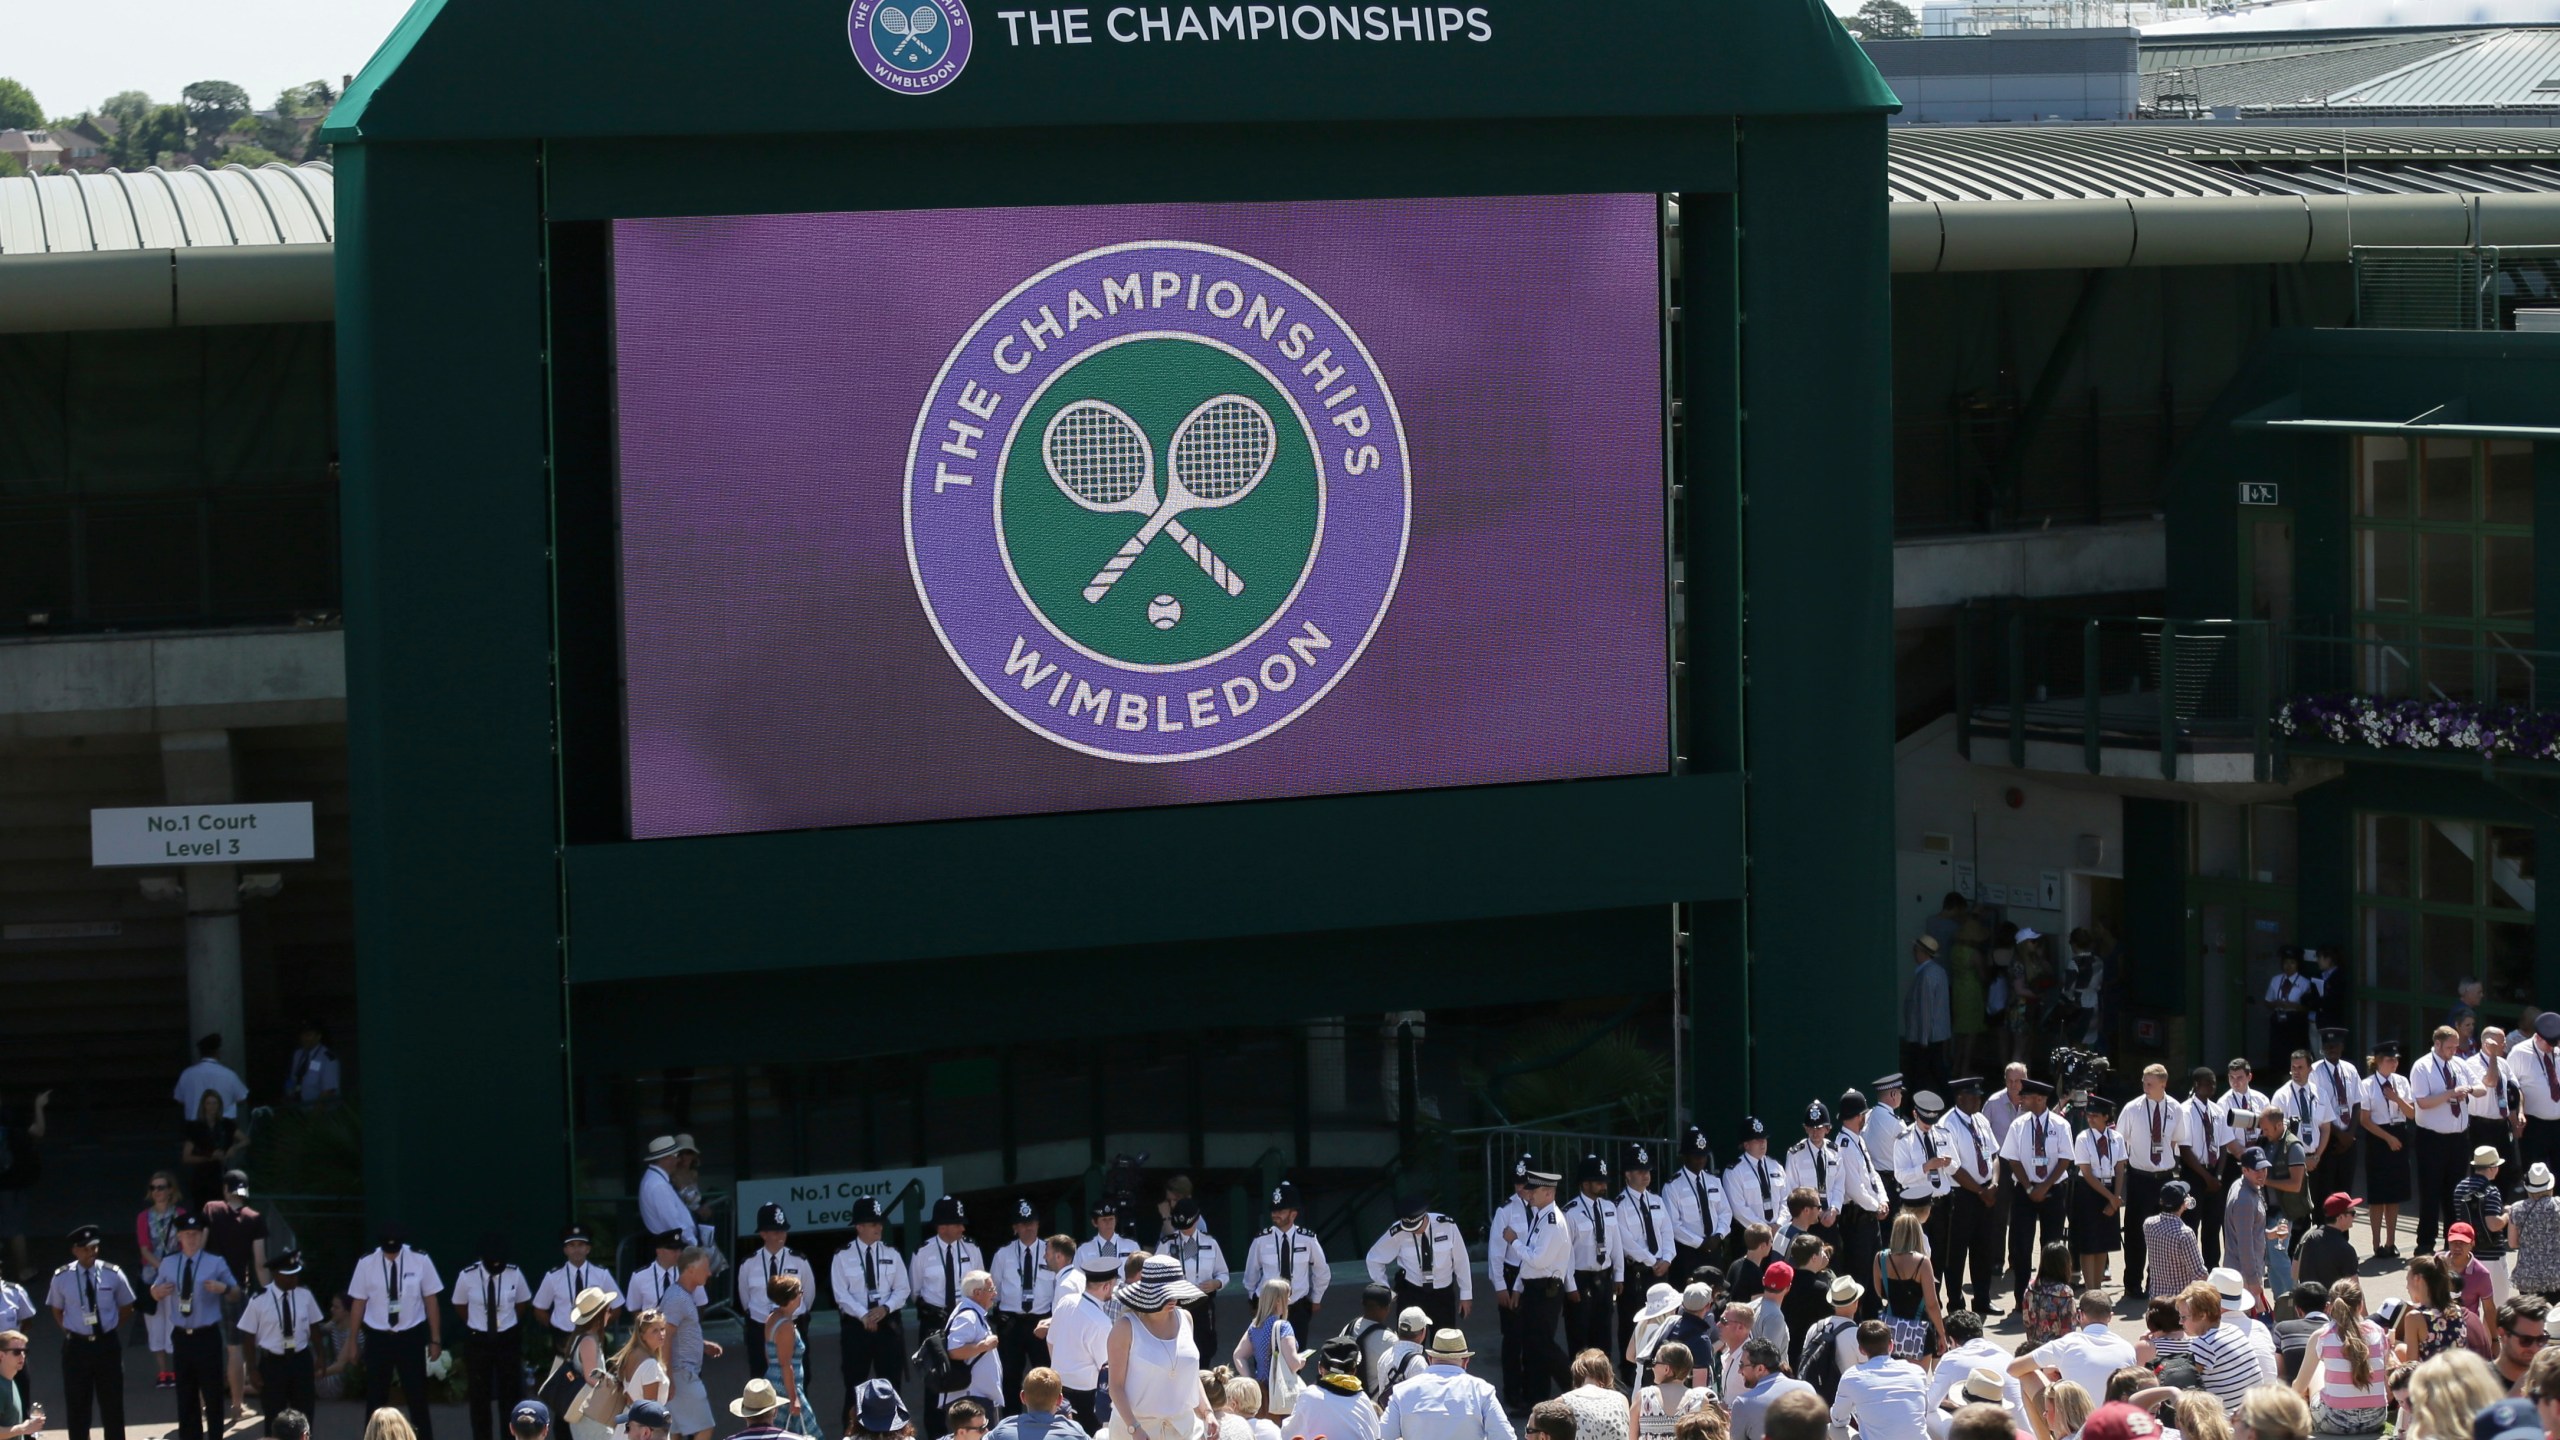 FILE - British police officers line up under the big screen on Murray Mount, ahead of the minute silence for the victims of the shooting in Tunisia last week, at the All England Lawn Tennis Championships in Wimbledon, London, Friday July 3, 2015. Tennis could be on the verge of massive structural change if separate proposals formulated by the four Grand Slam tournaments and the WTA and ATP professional tours can succeed. (AP Photo/Tim Ireland, File)